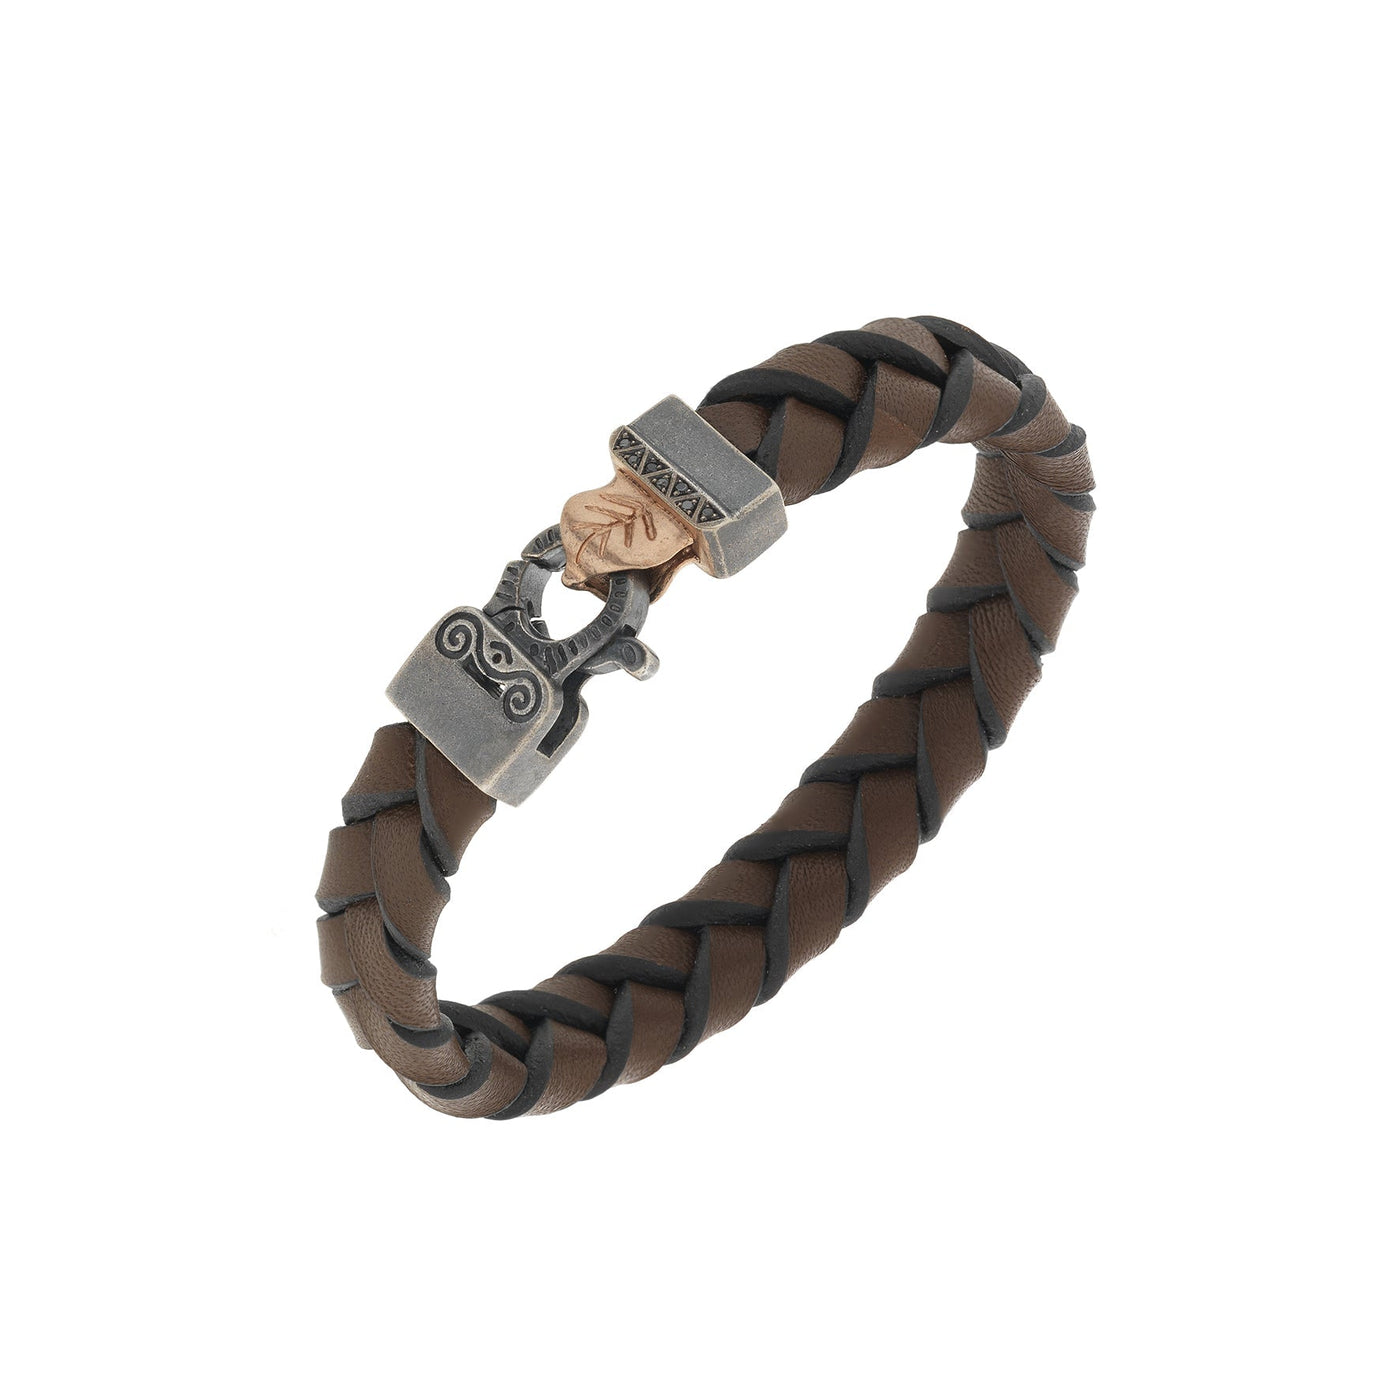 Lash Braided Leather Bracelet with Brown Leather